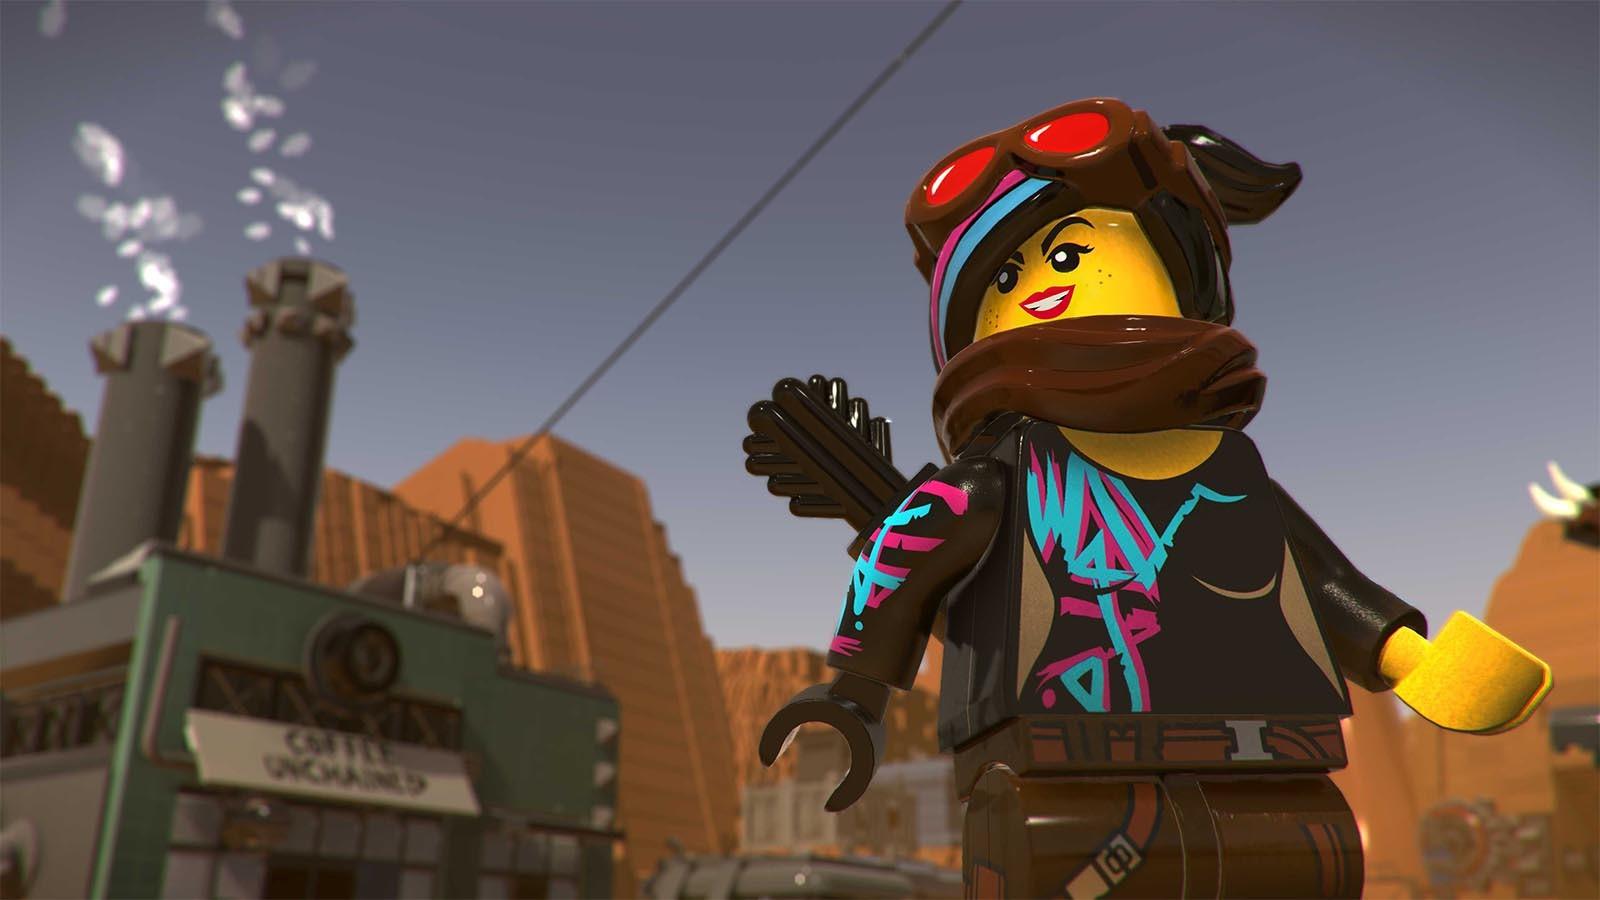 The LEGO Movie 2 Videogame [Steam CD Key] for PC